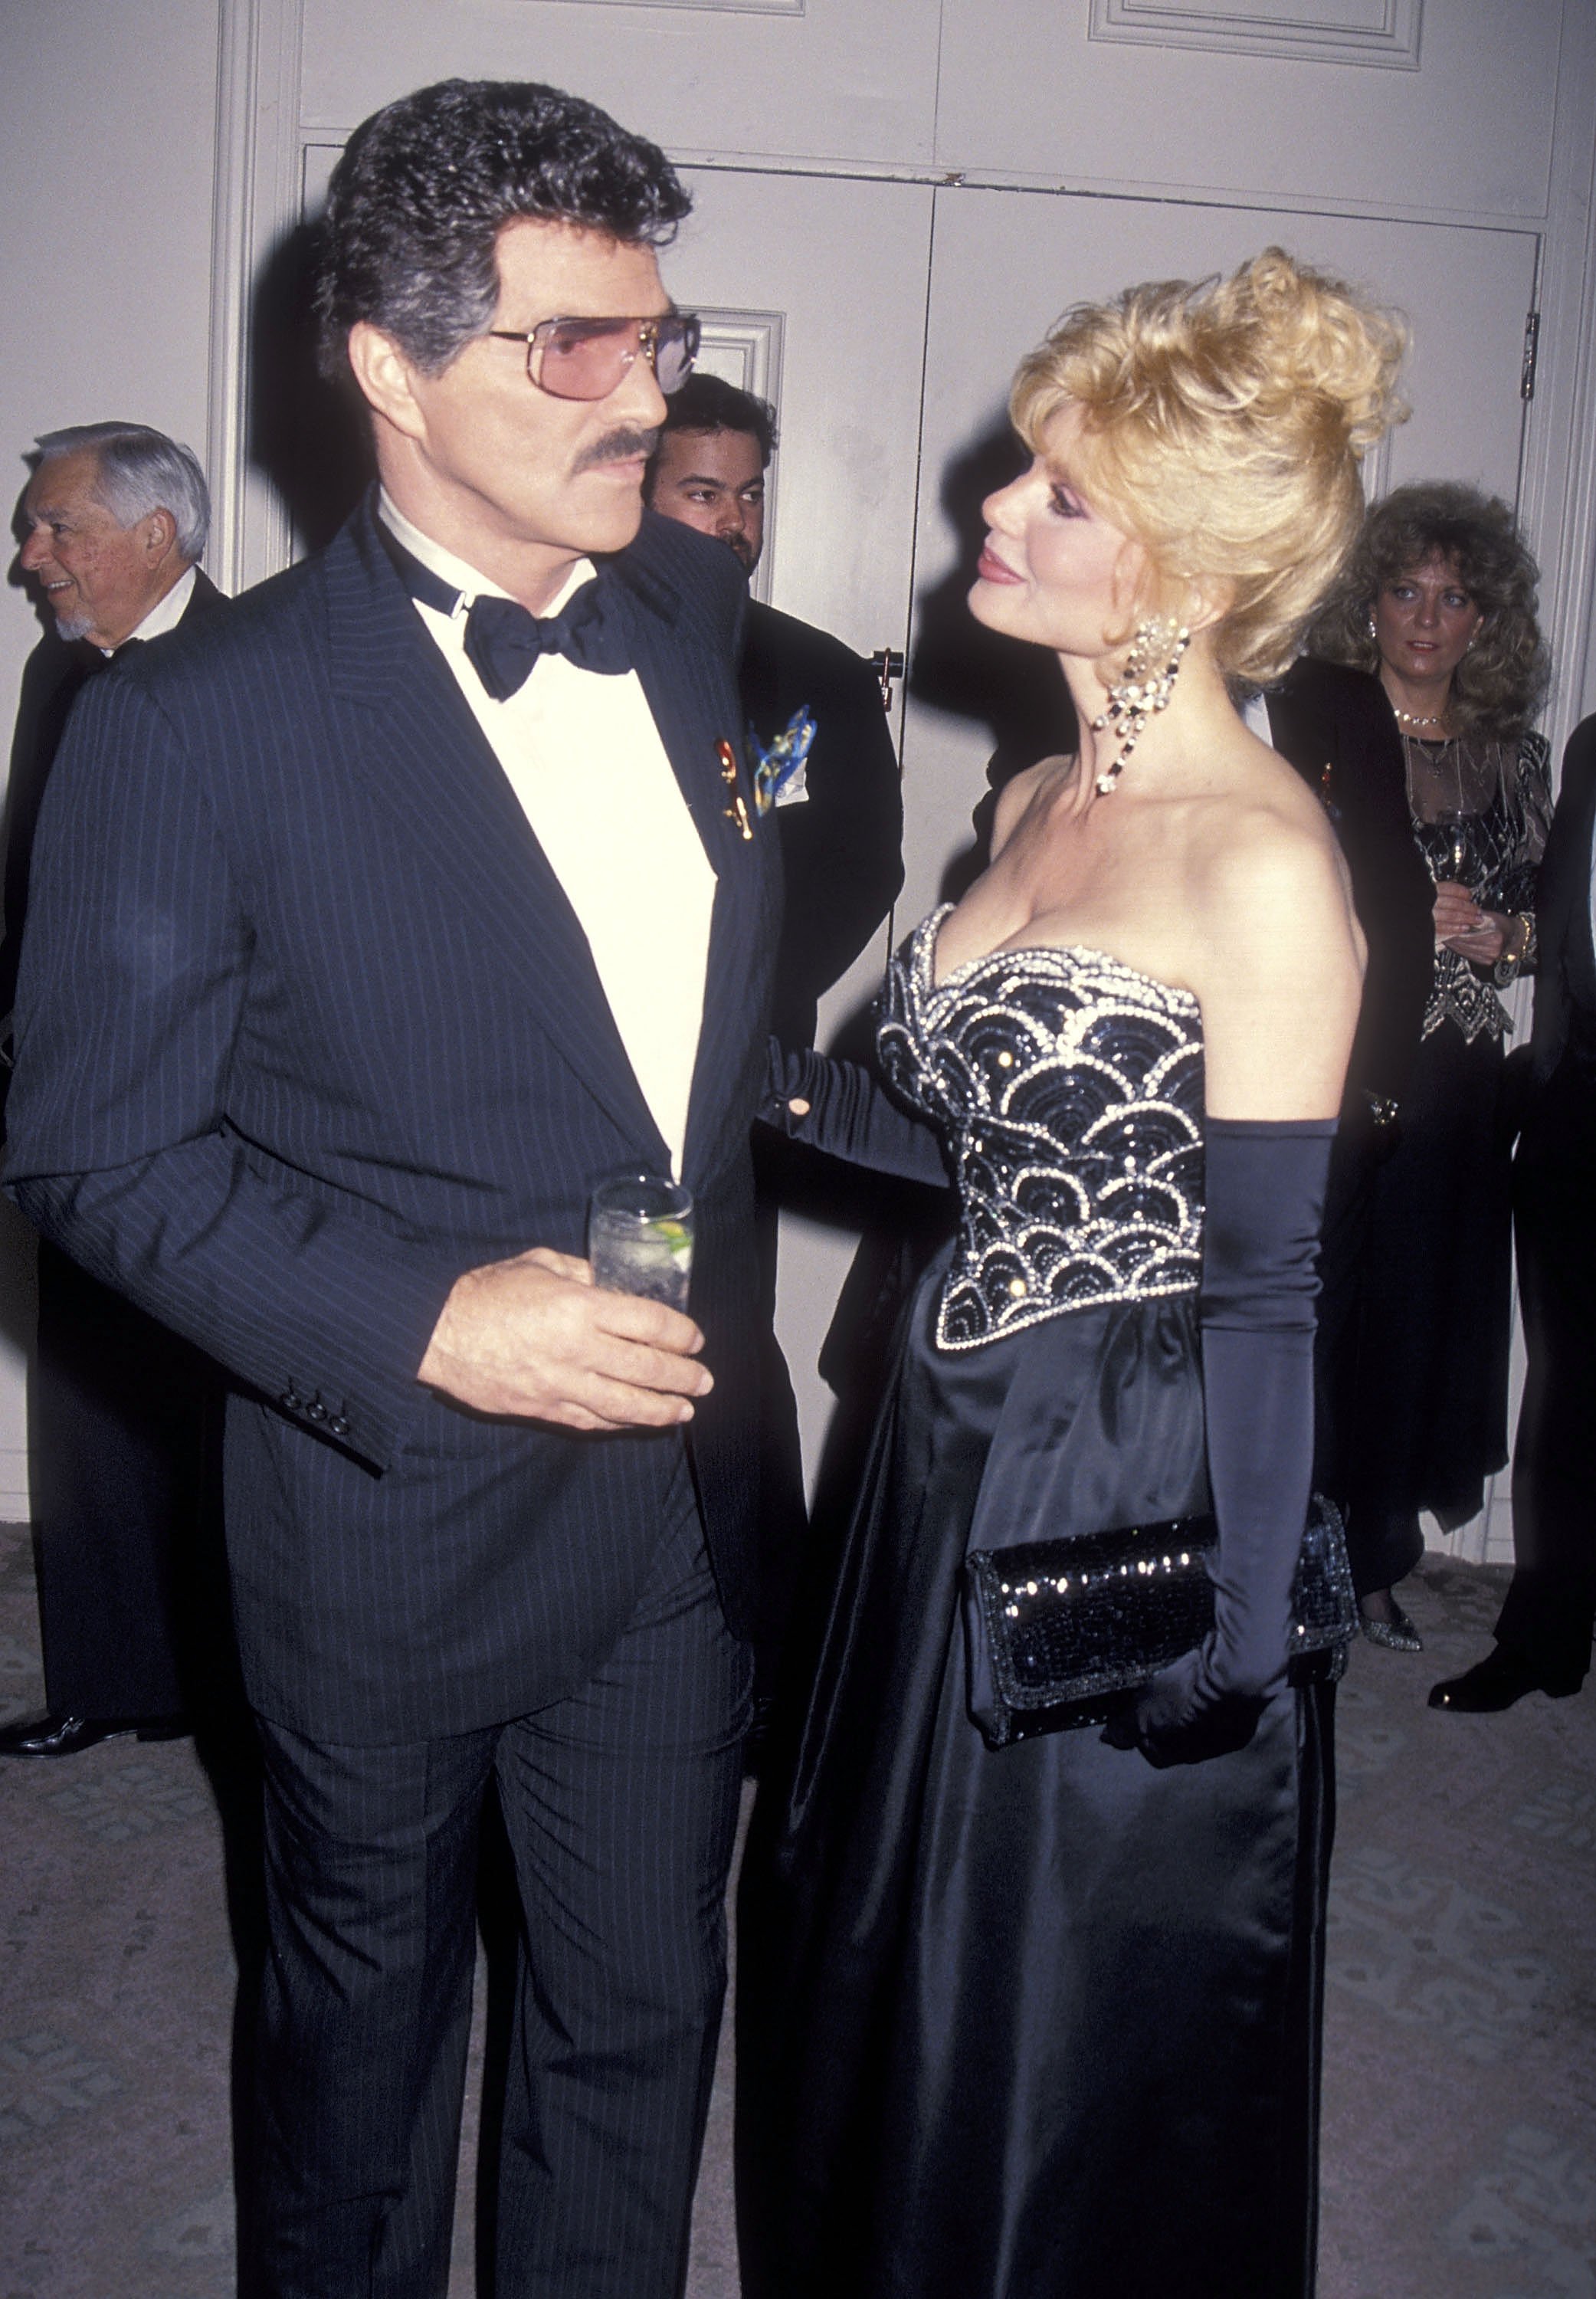 Loni Anderson and her spouse Burt Reynolds attending the Friars Club of California's 14th Annual Lifetime Achievement Award at the Beverly Hilton Hotel on March 28, 1993 in Beverly Hills, California. / Source: Getty Images